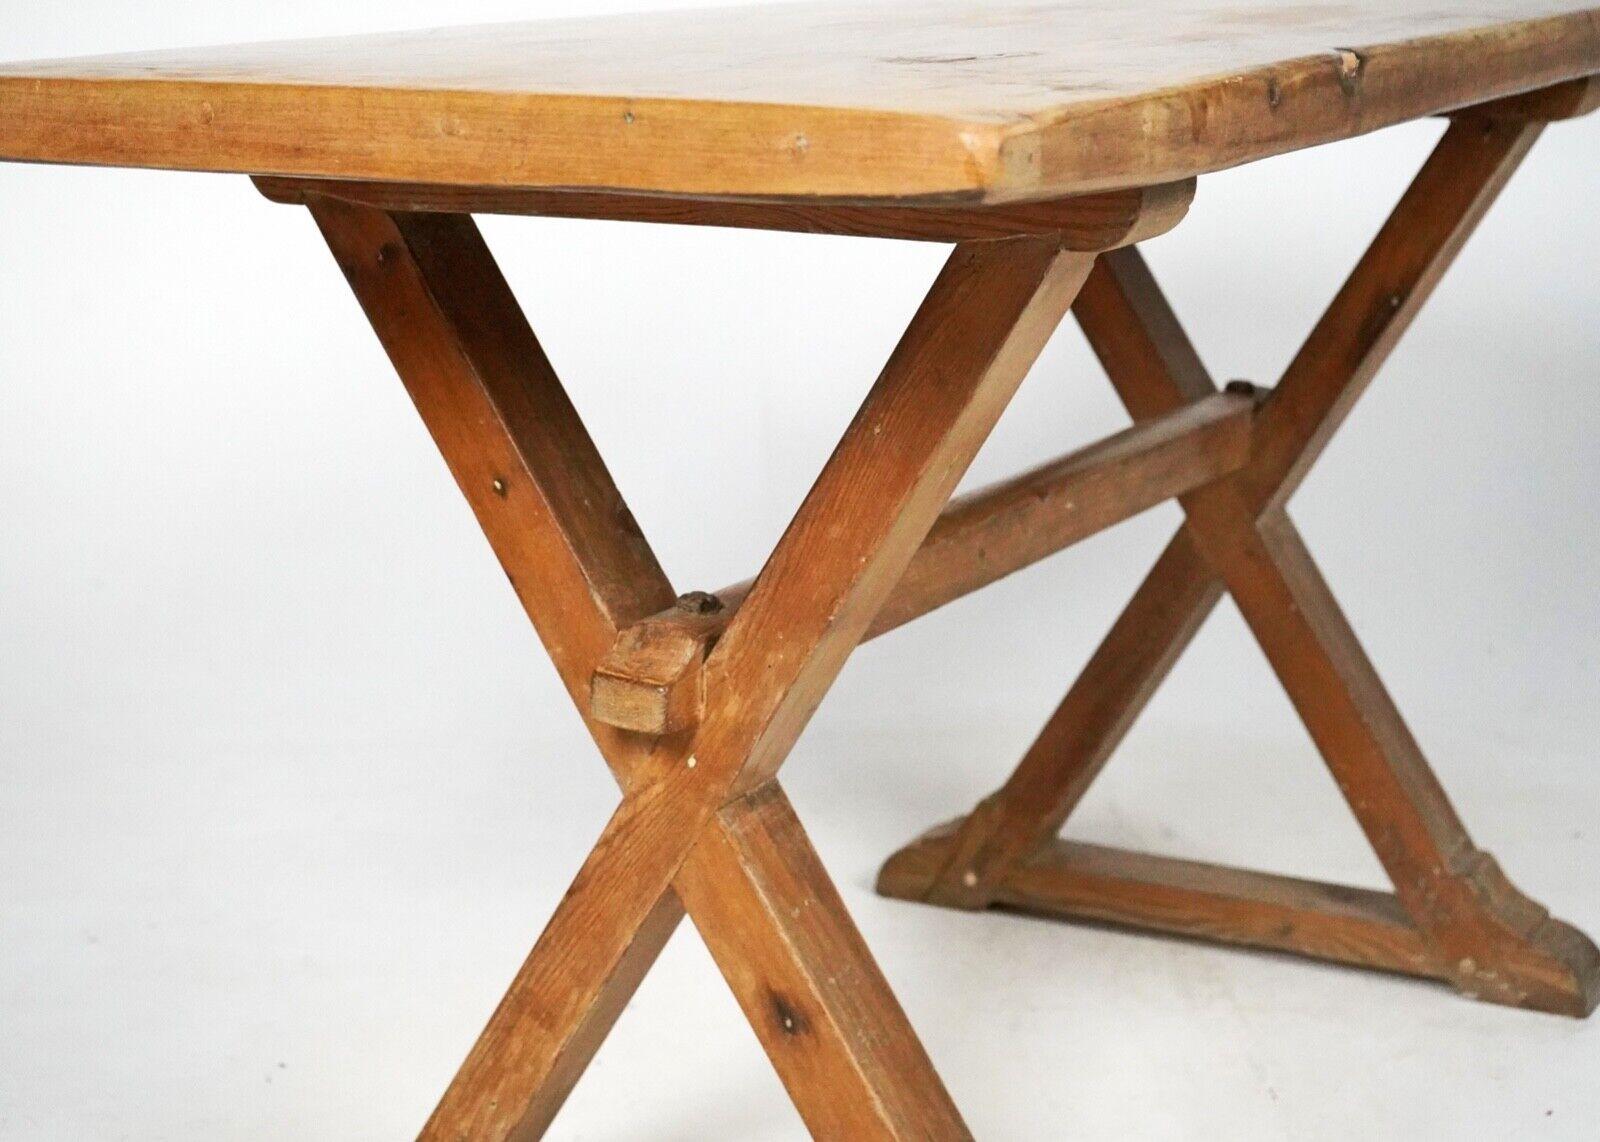 This beautiful 19th century tavern table is crafted from a single slab top and a sturdy pine double x base, a timeless piece that would fit into a range of interiors.
Condition Is great, its strong and sturdy.

Condition 
Please do take a careful